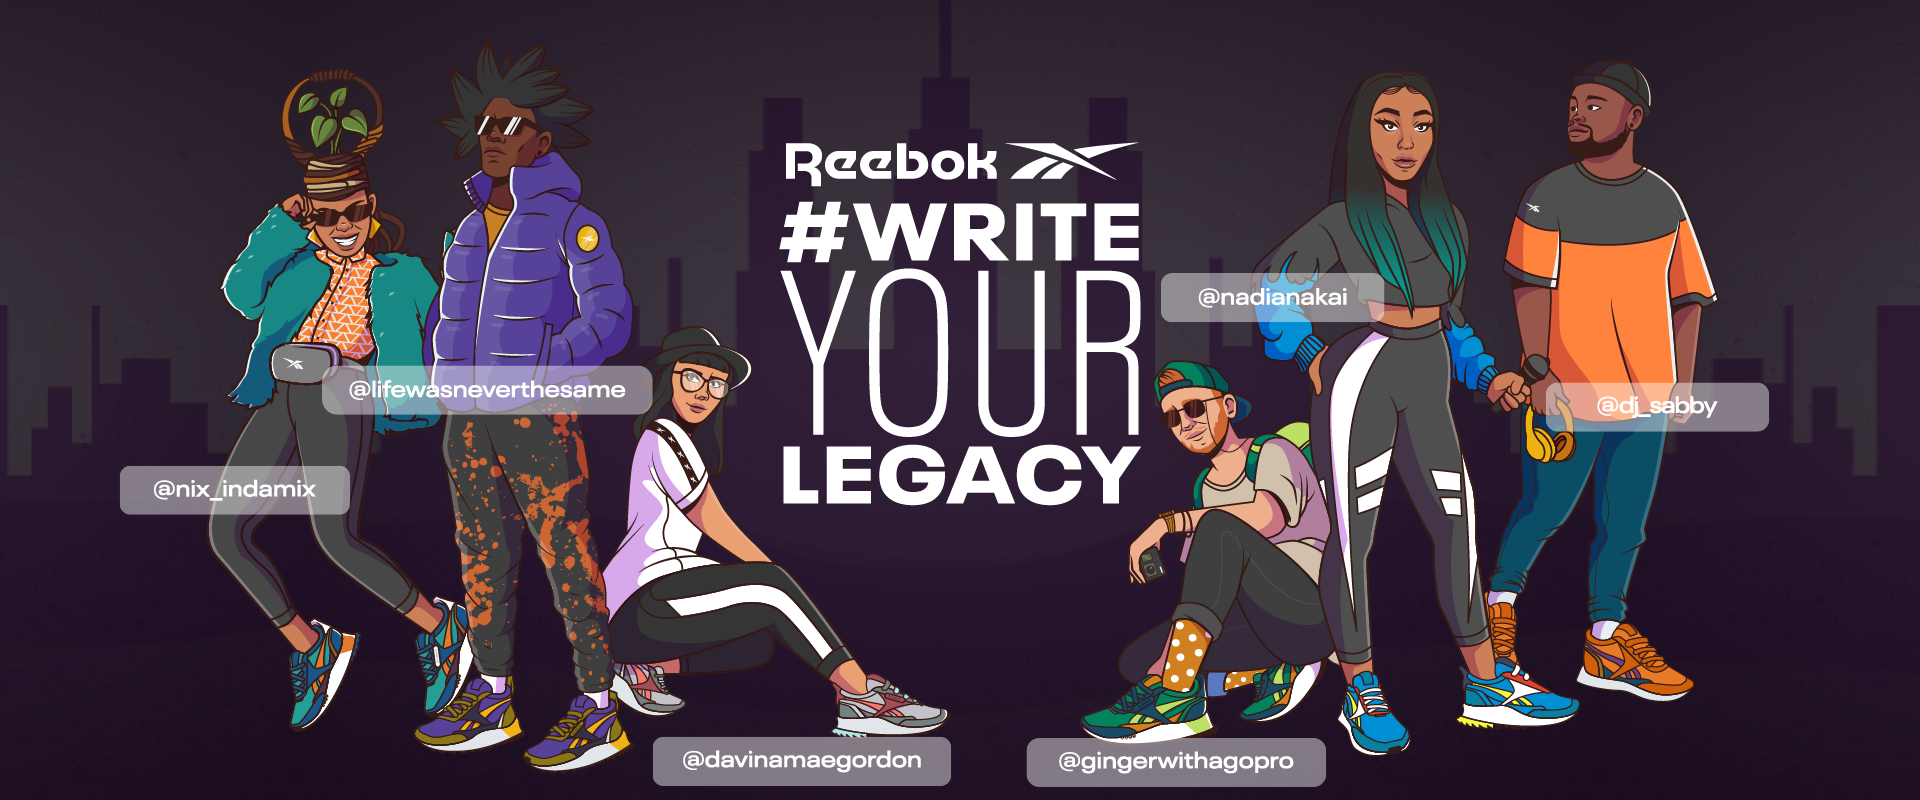 Write your legacy